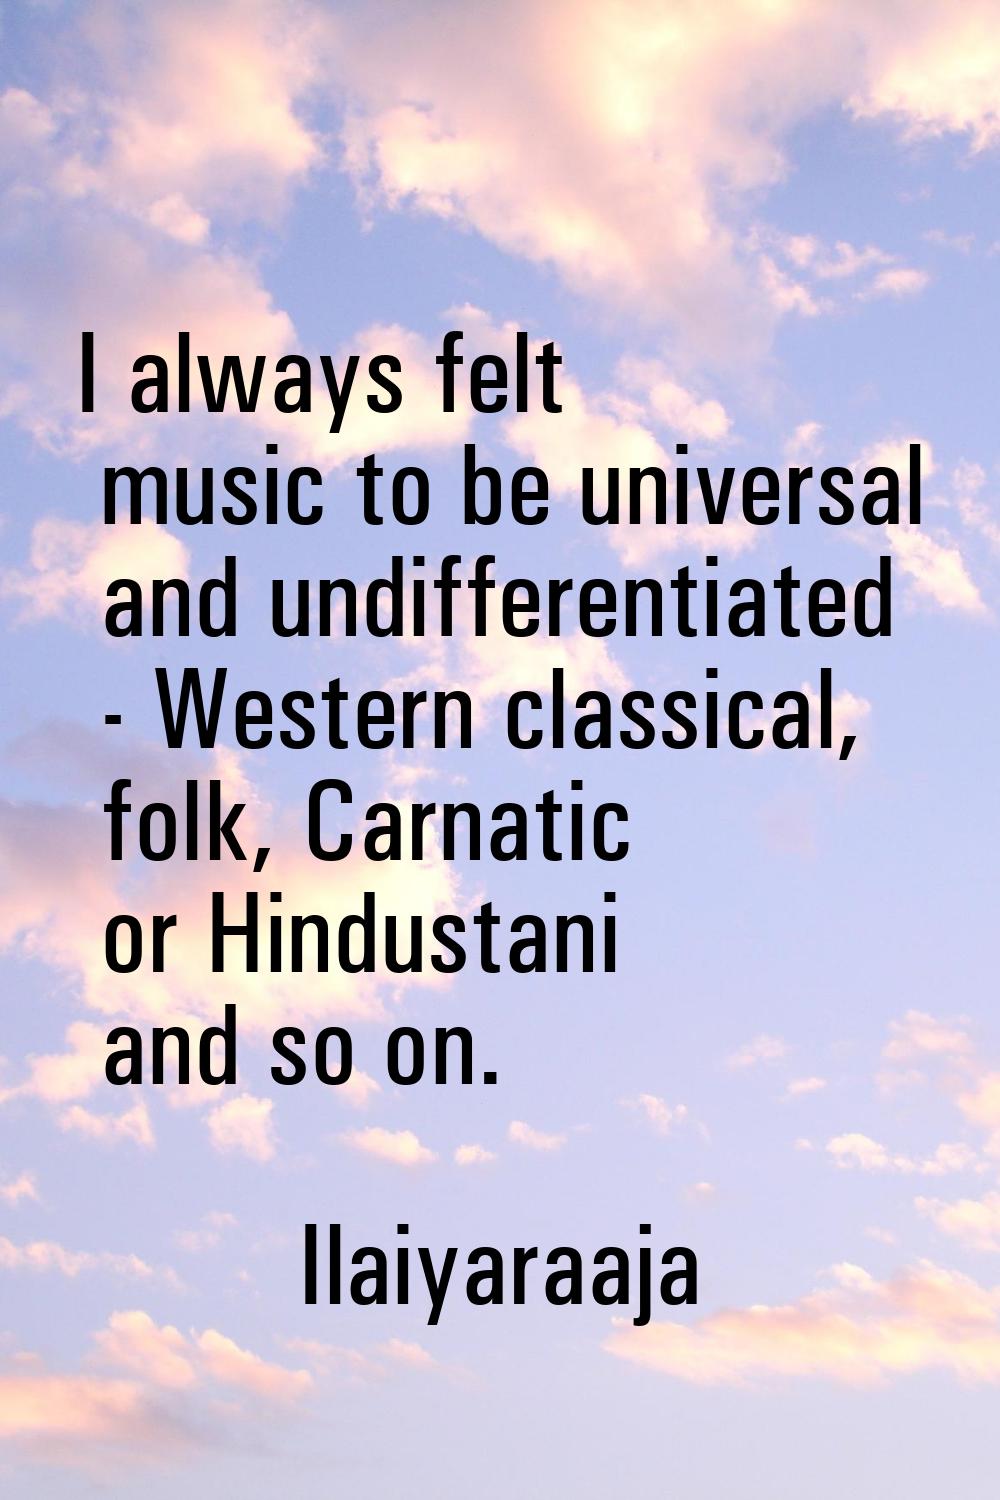 I always felt music to be universal and undifferentiated - Western classical, folk, Carnatic or Hin